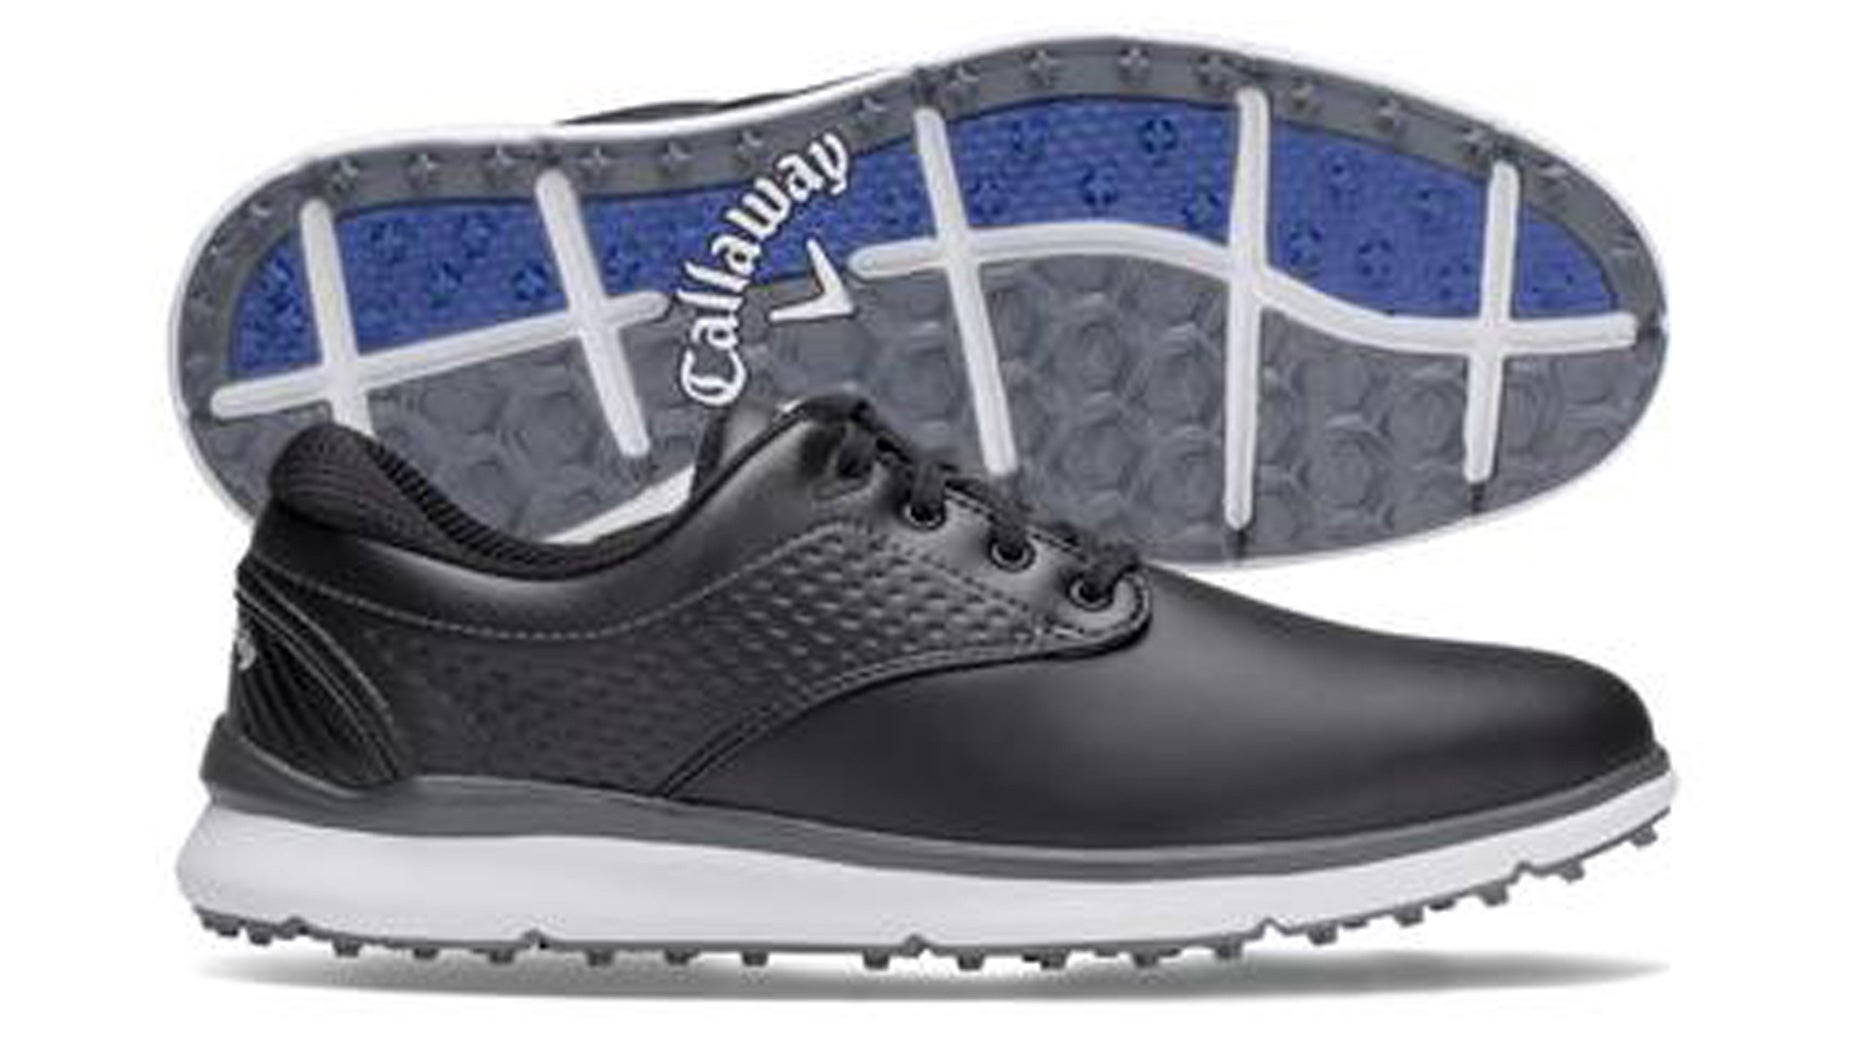 Best golf shoes 10 comfortable pairs to buy for Father's Day